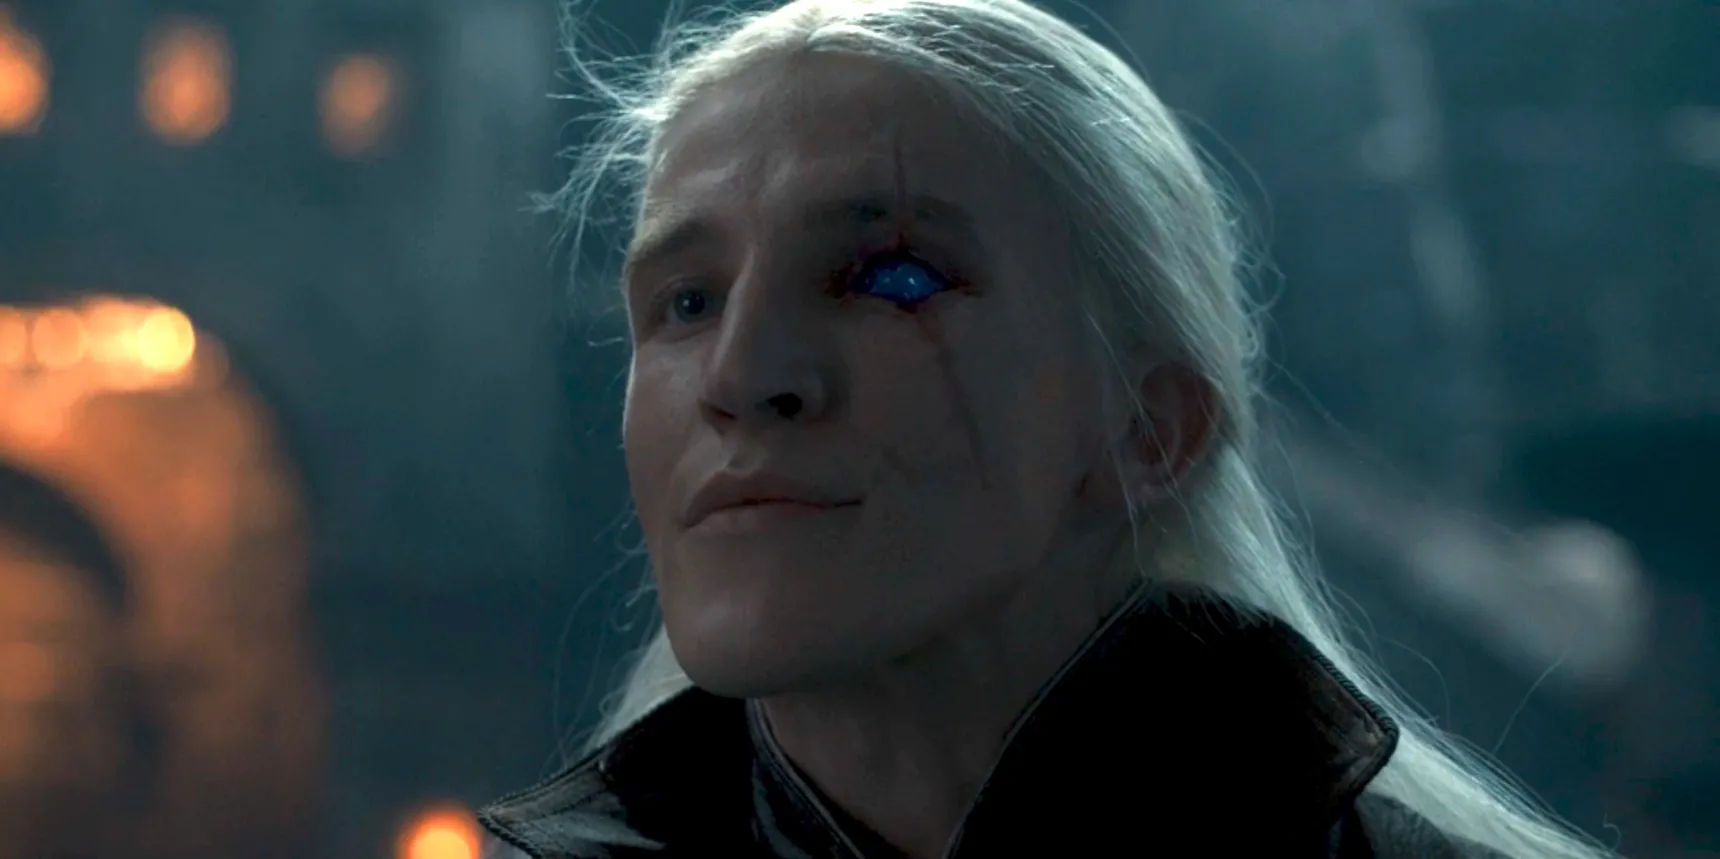 Aemond Targaryen is House of the Dragon’s most tragic character and its best villain